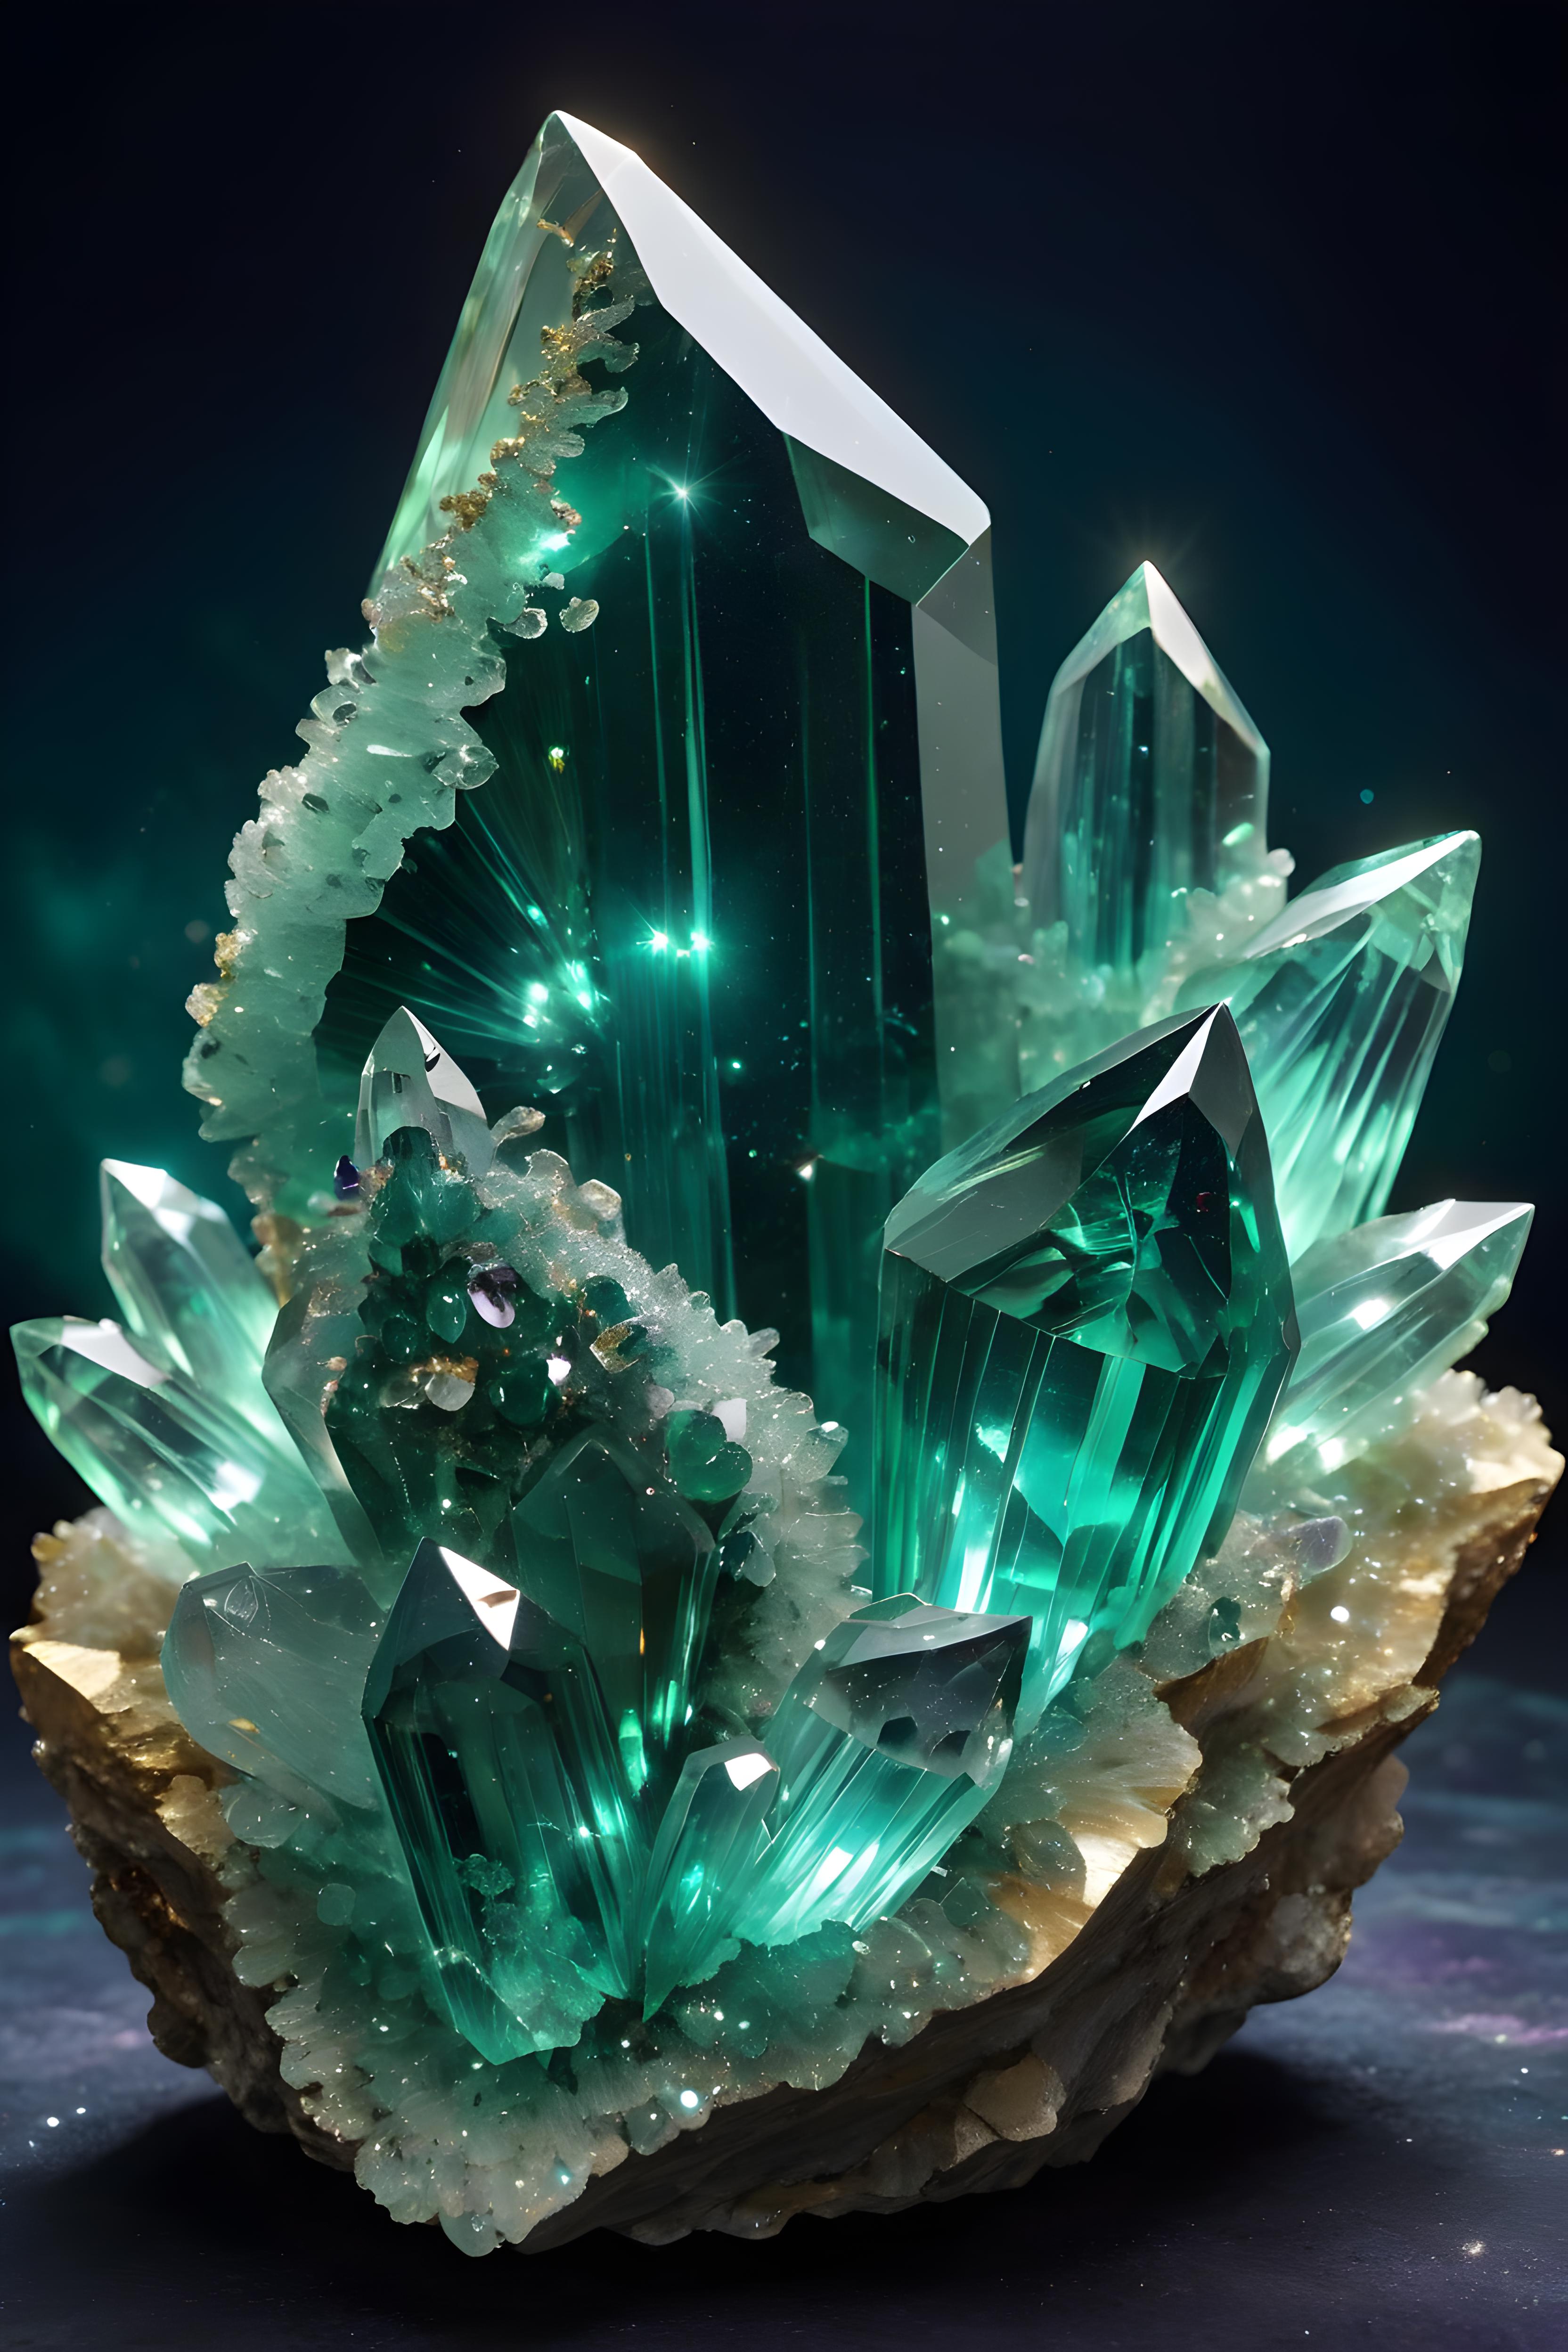 Green and clear crystal geode on display.